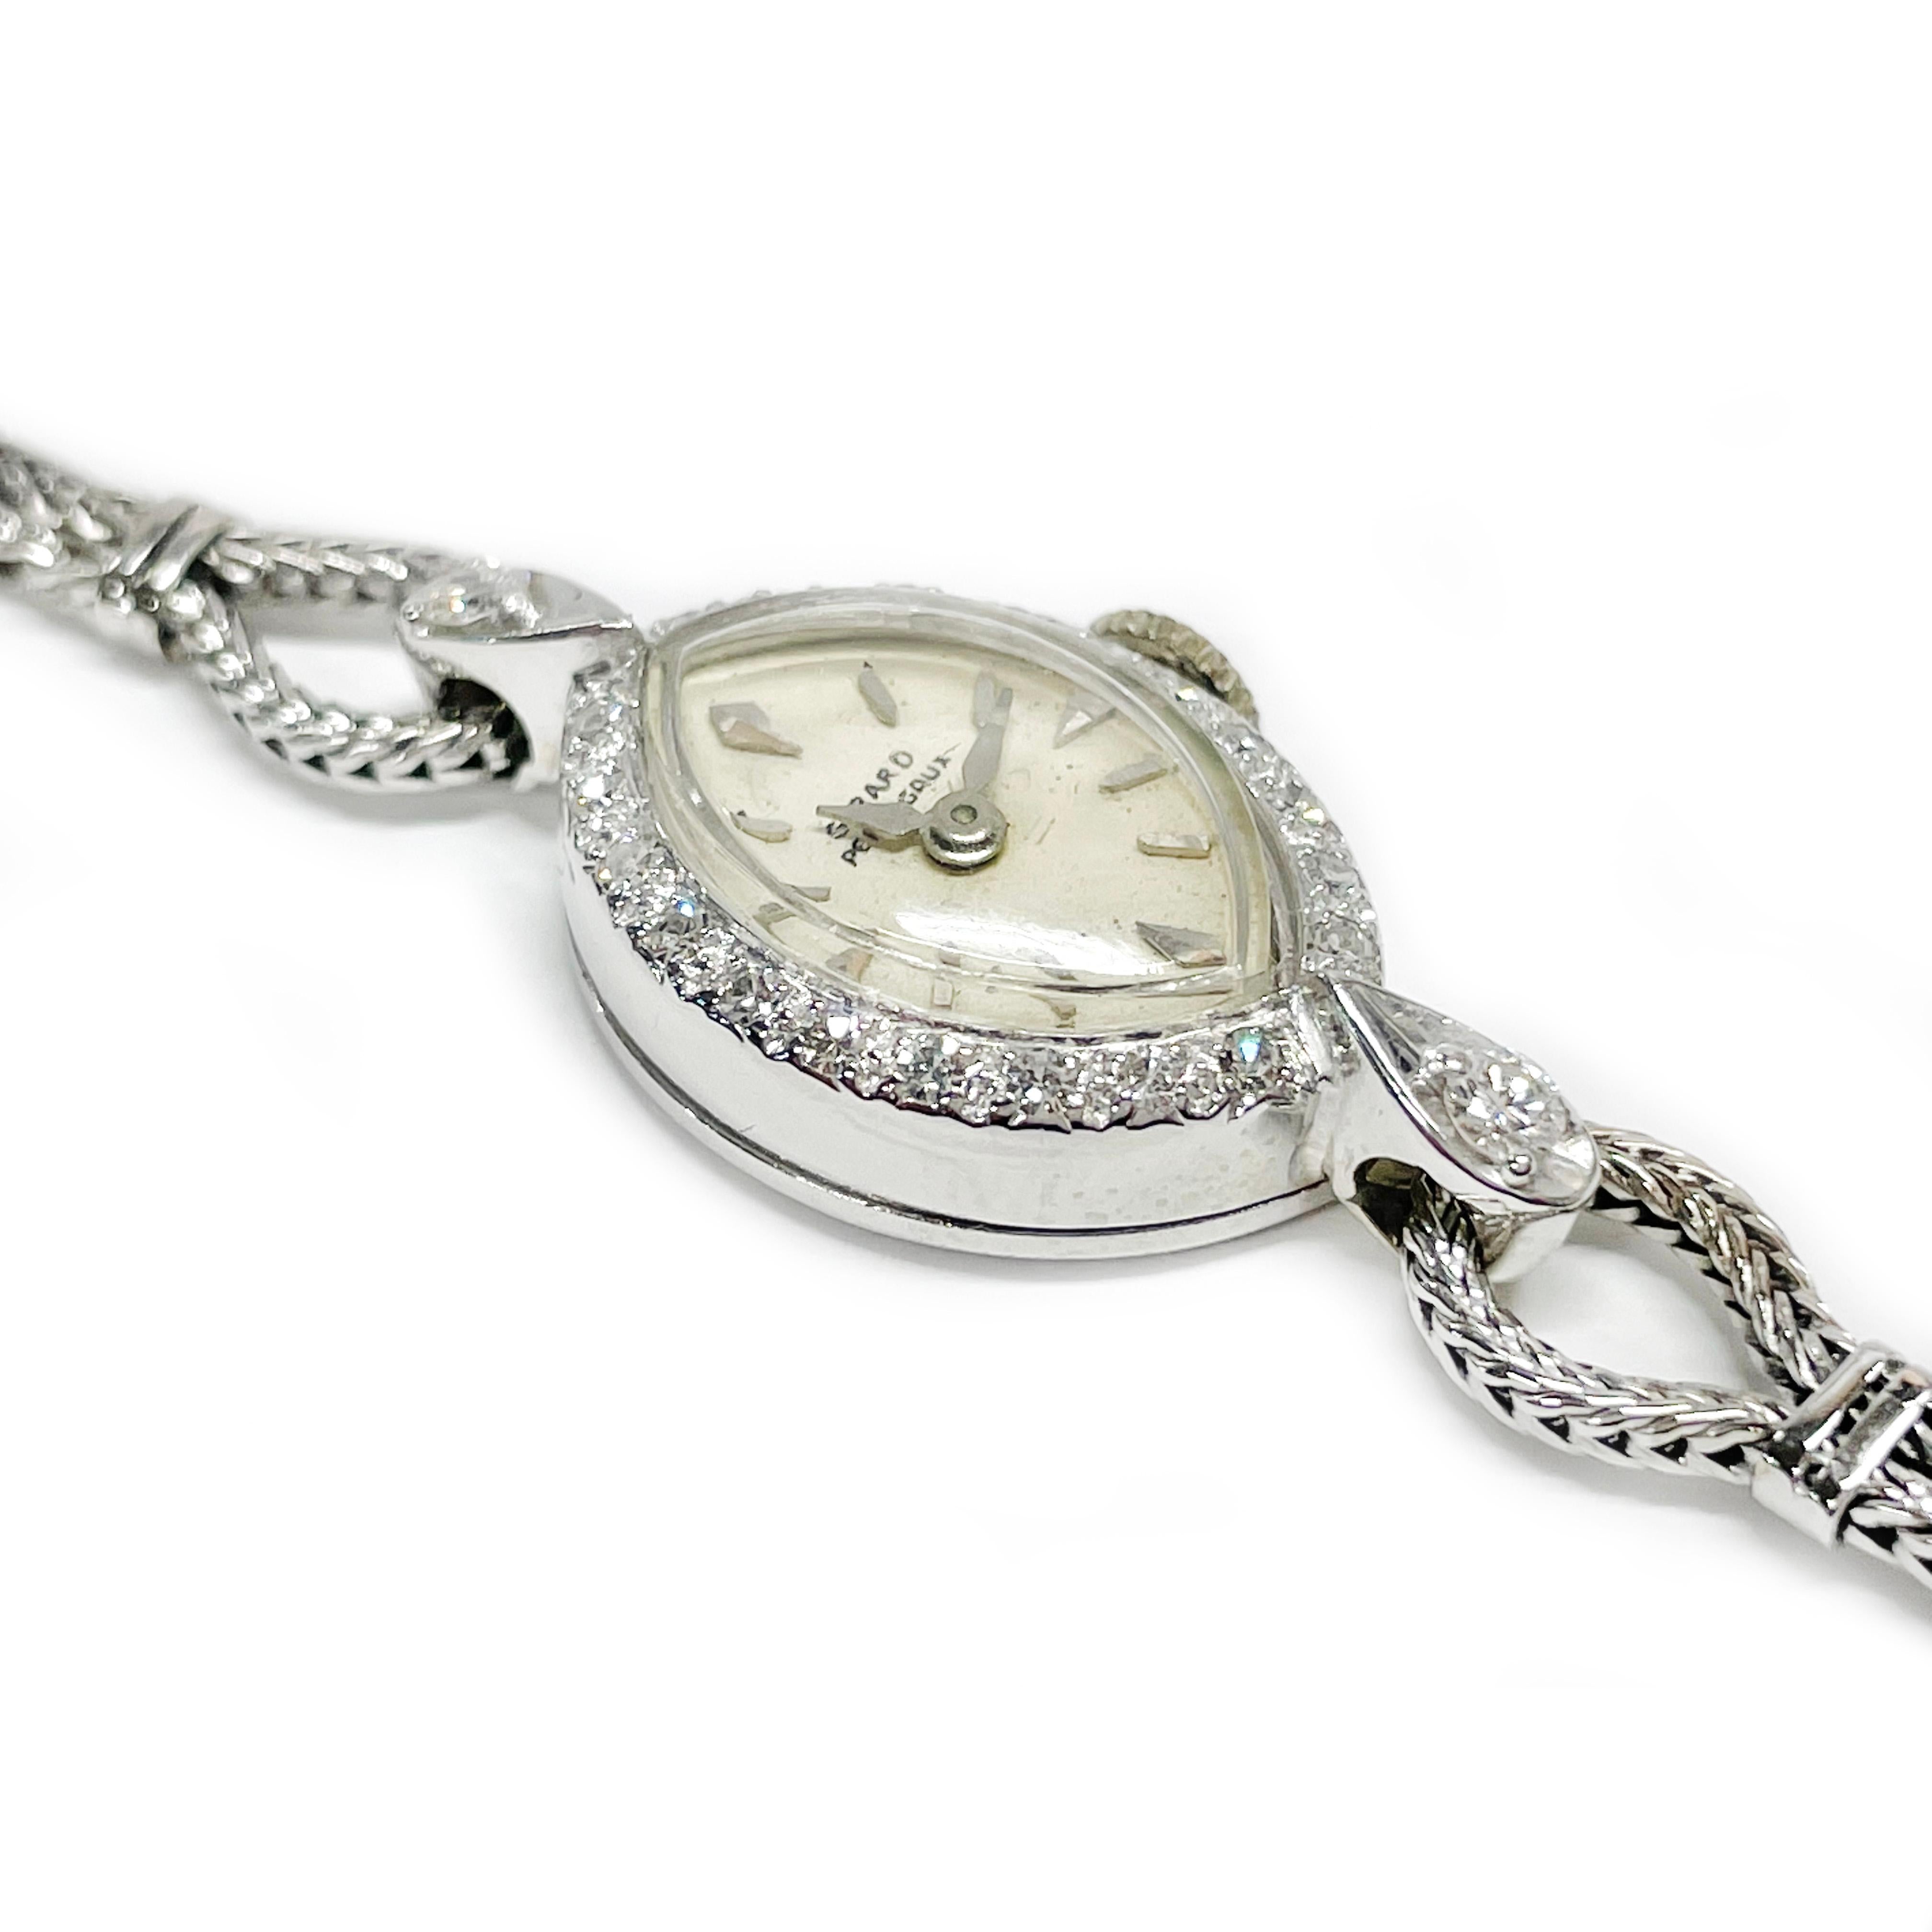 Girard Perregaux Ladies Diamond Bracelet Watch, circa 1930s. The marquise dial is framed in round bead-set single-cut diamonds with silver hour and minute hands. The watch features twenty round diamonds surrounding the dial and two larger diamonds,